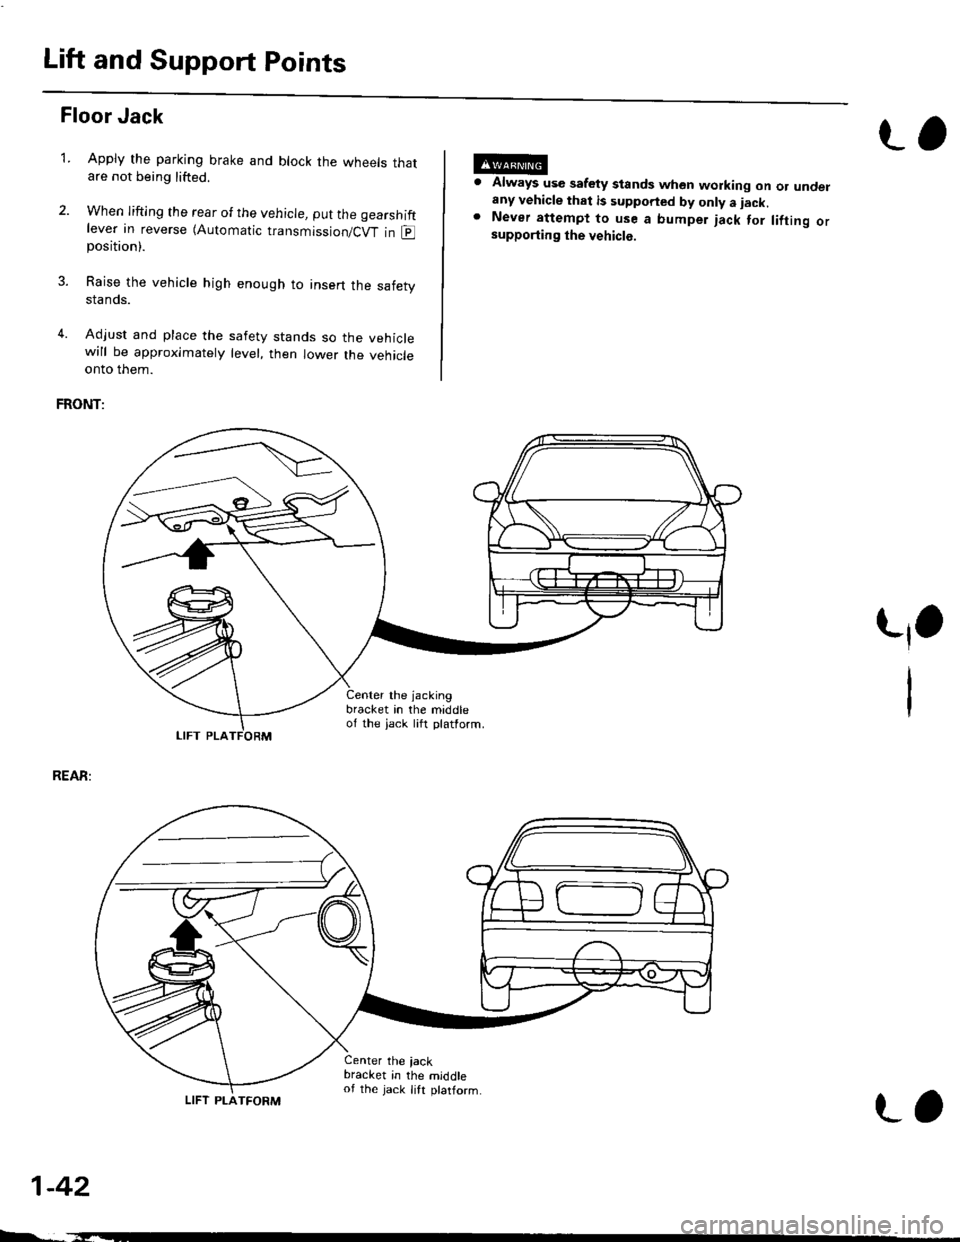 HONDA CIVIC 1997 6.G Workshop Manual Lift and Support Points
Floor Jack
Apply the parking brake and block the wheets thatare not being lifted.
When lifting the rear of the vehicle, put the gearshiftlever in reverse (Automatic transmissio